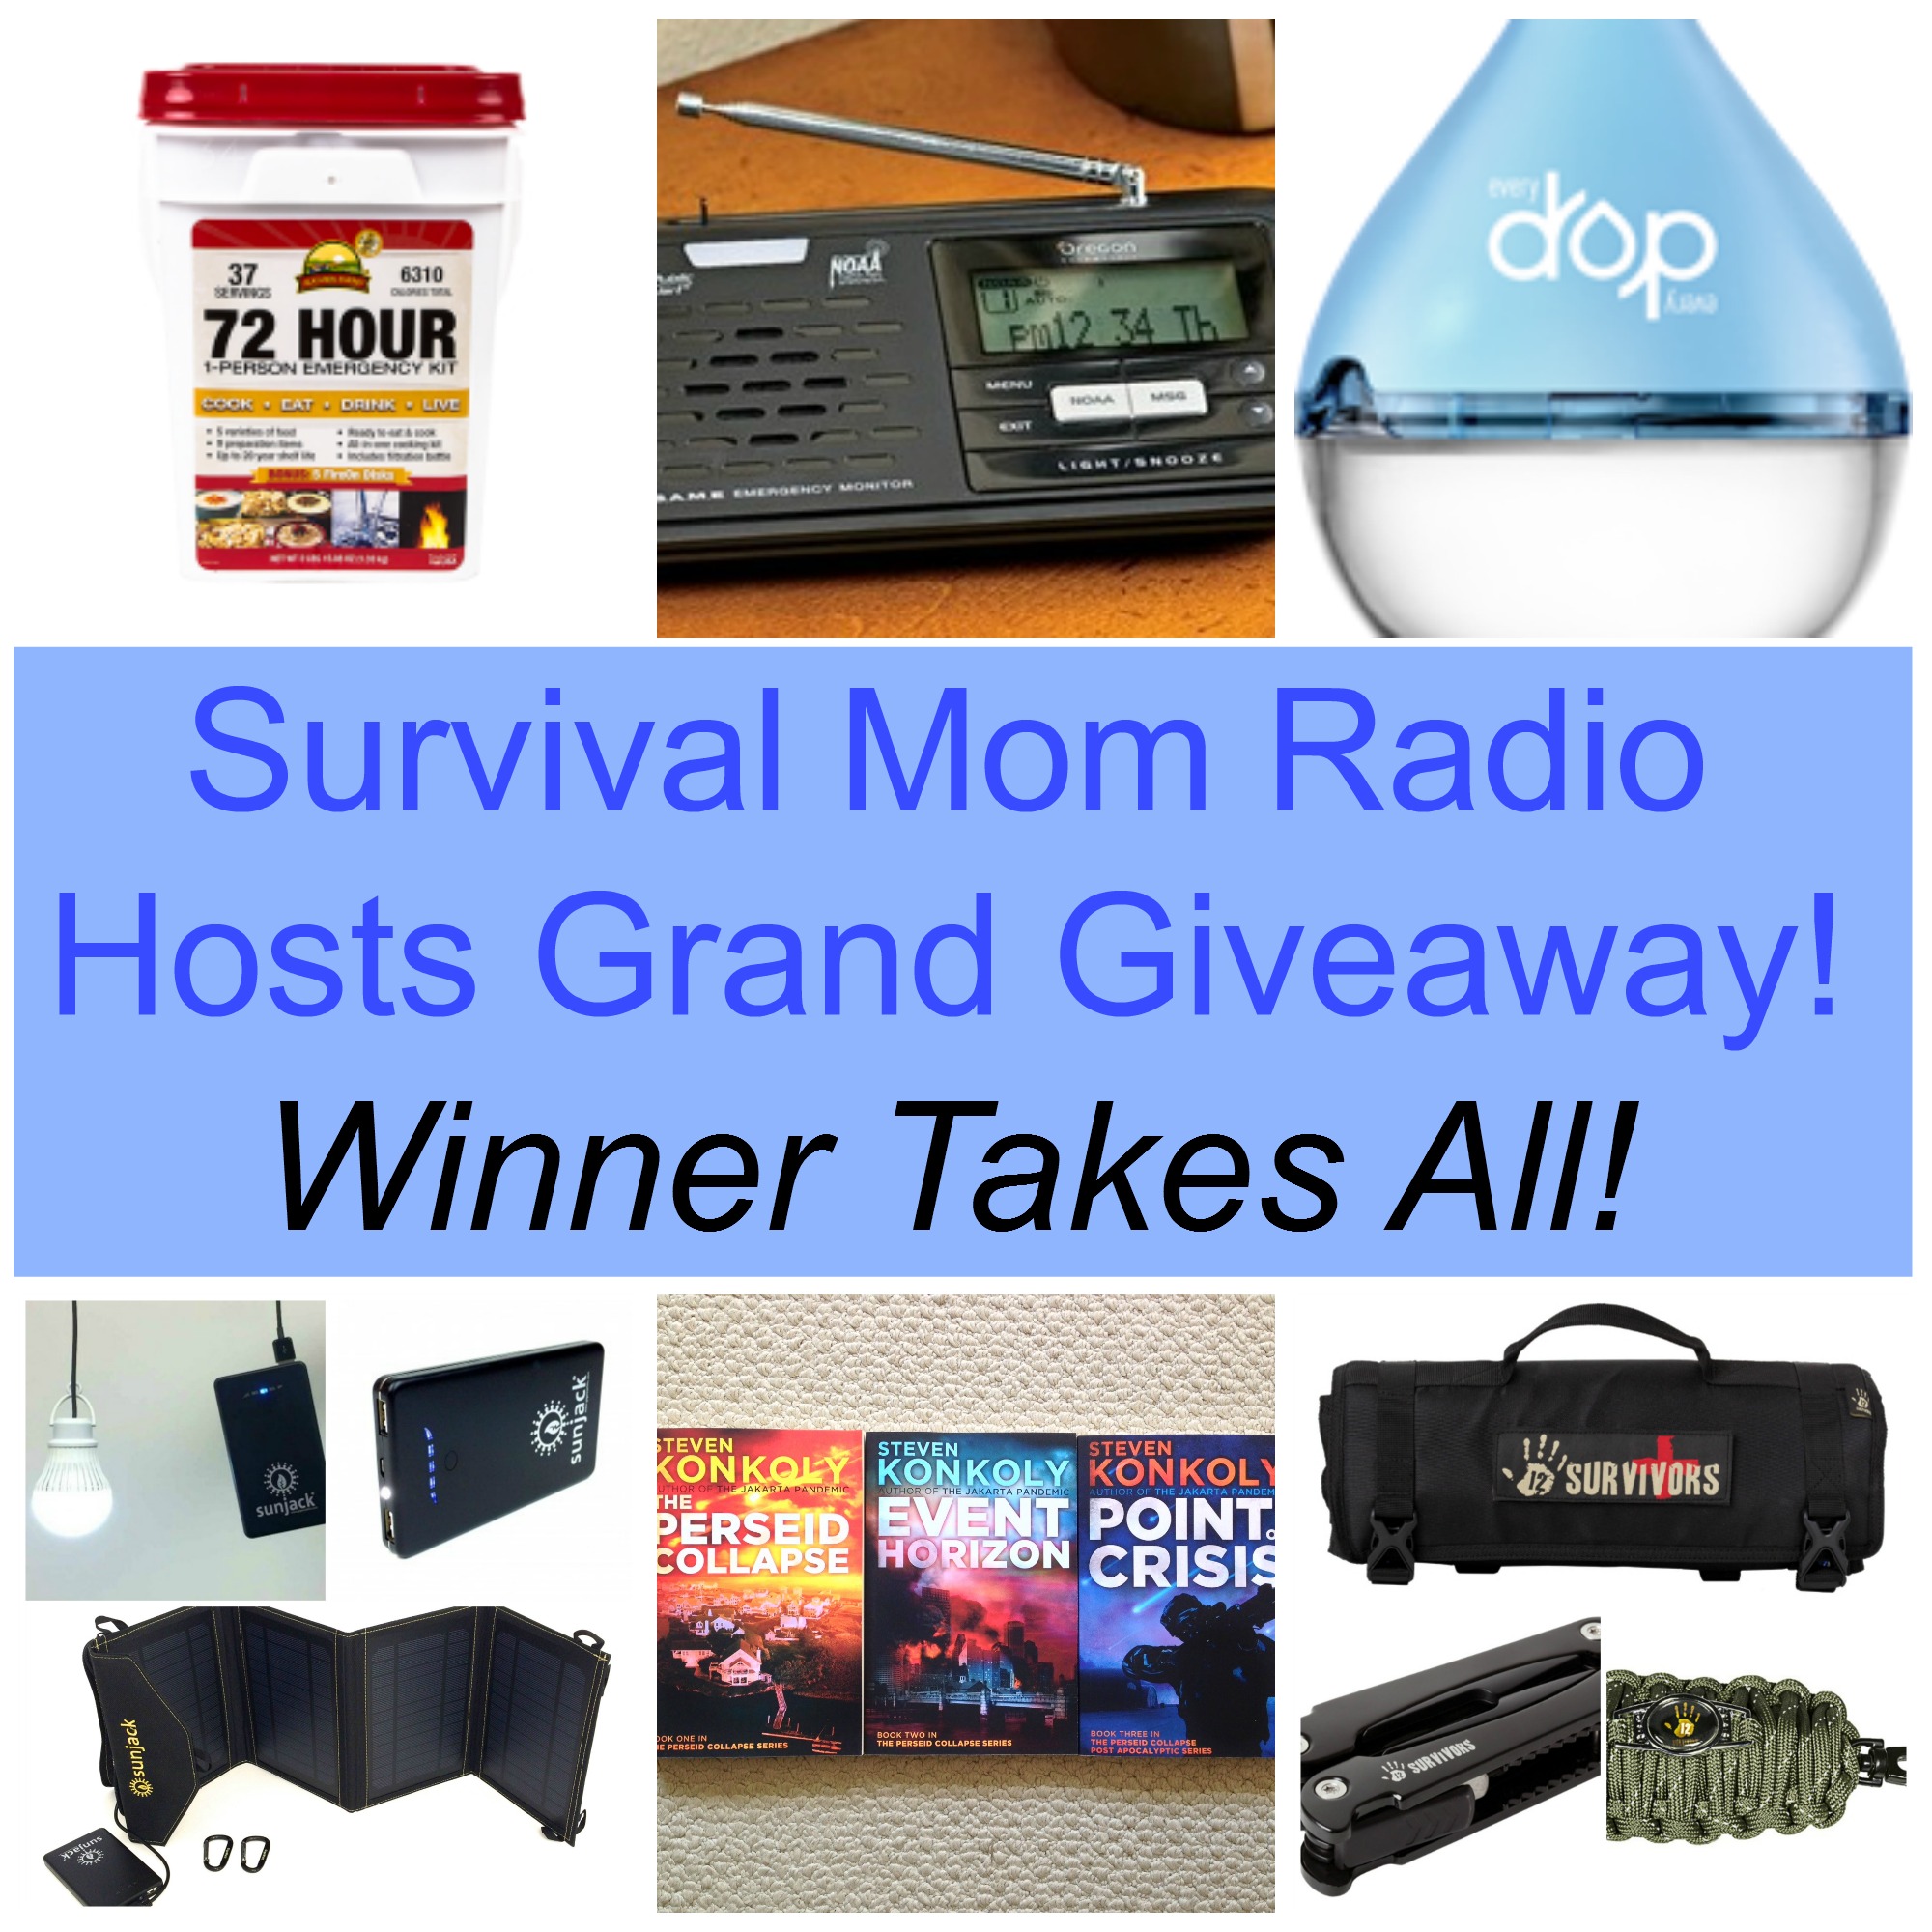 Survival Mom Radio Network Grand Giveaway #1